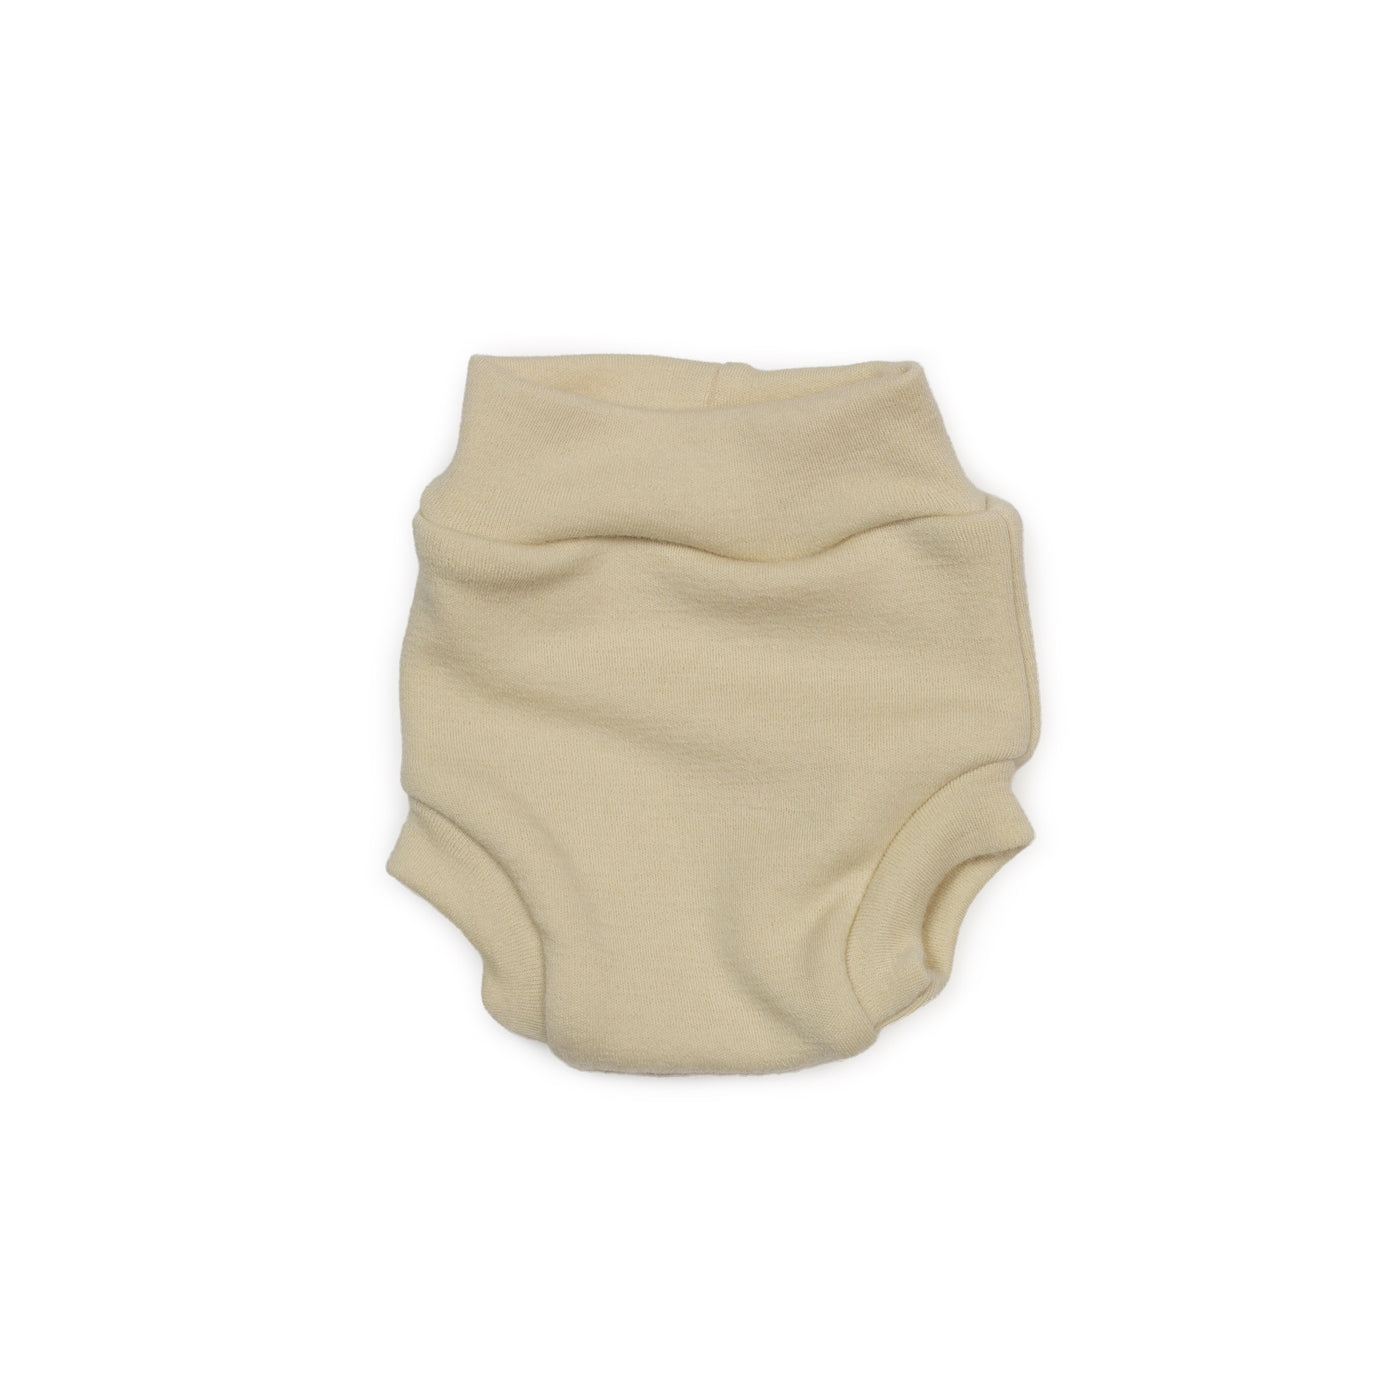 Babee Greens wool pull-on diaper cover small